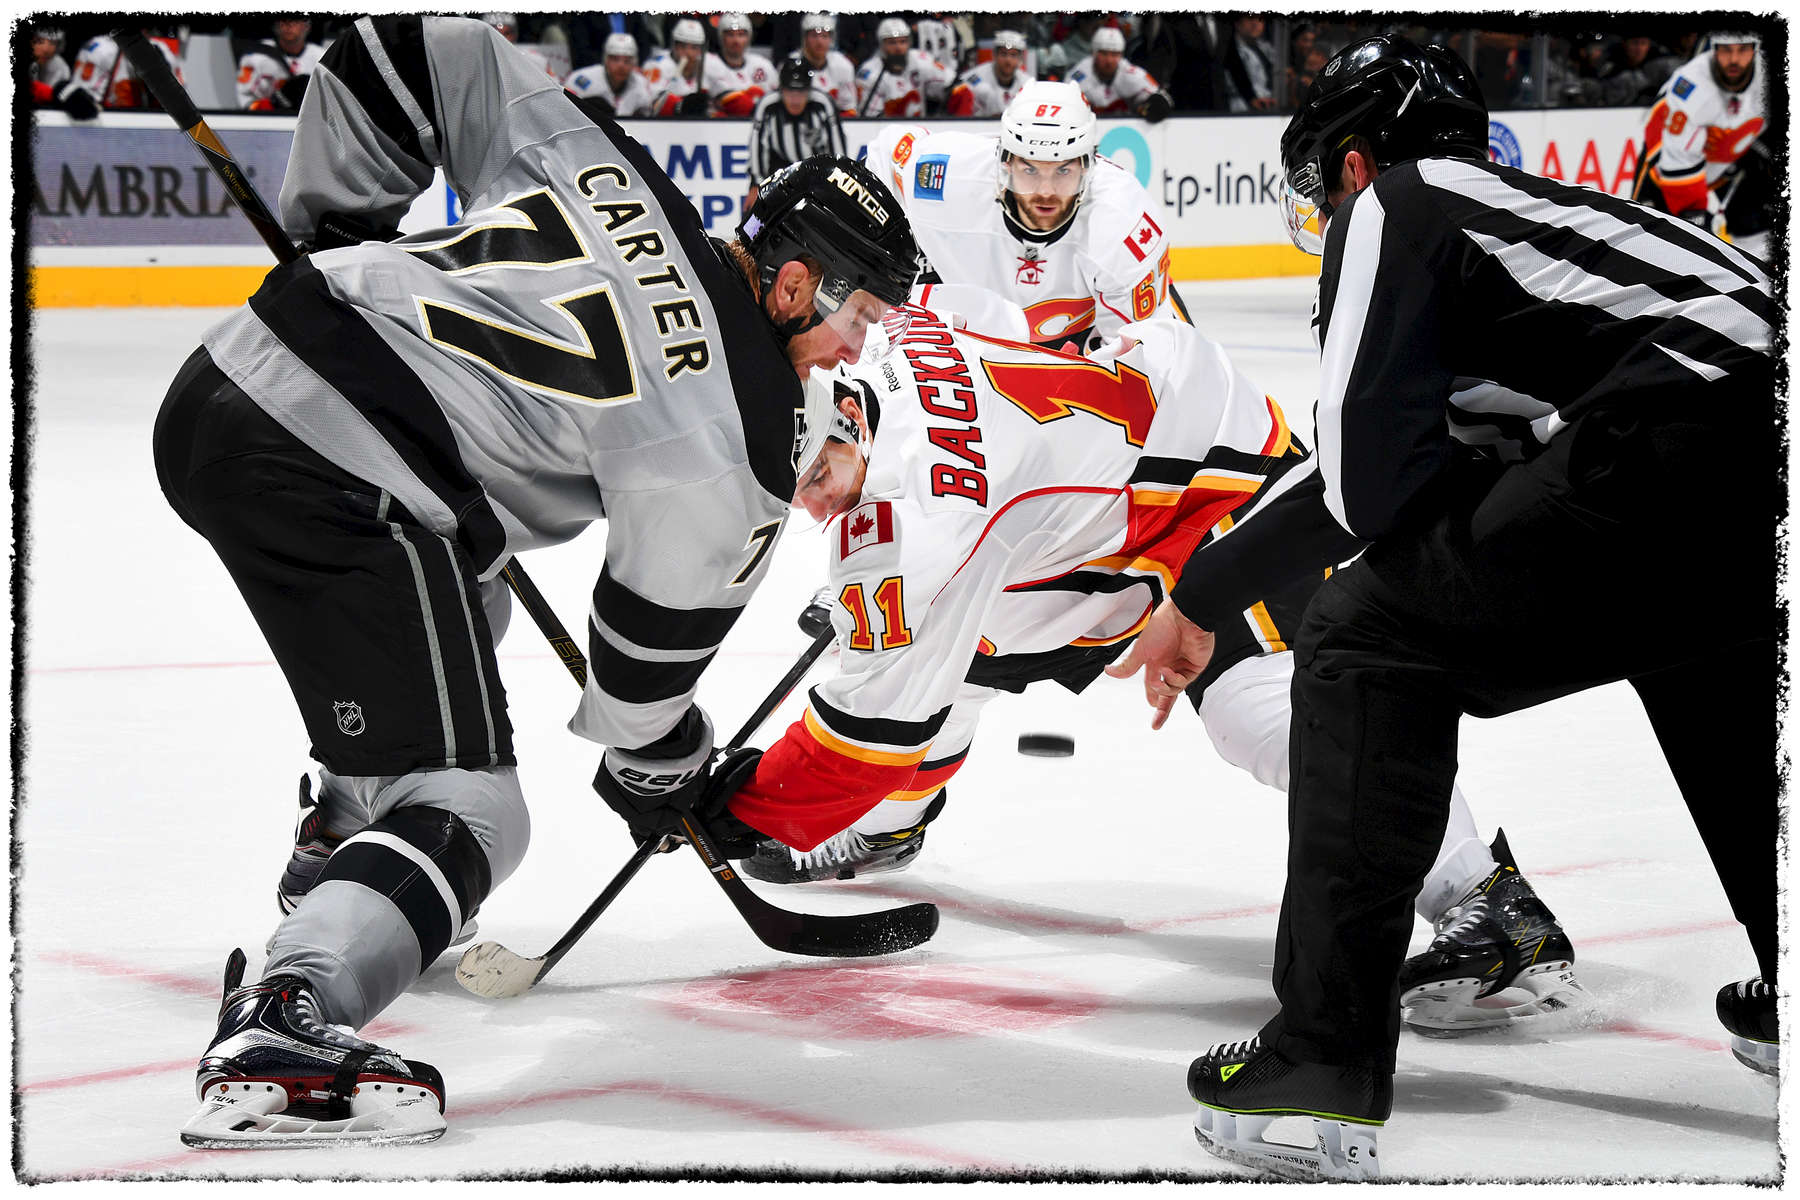 Photographed for Los Angeles Kings / NHL/ Bernstein Associates Inc.